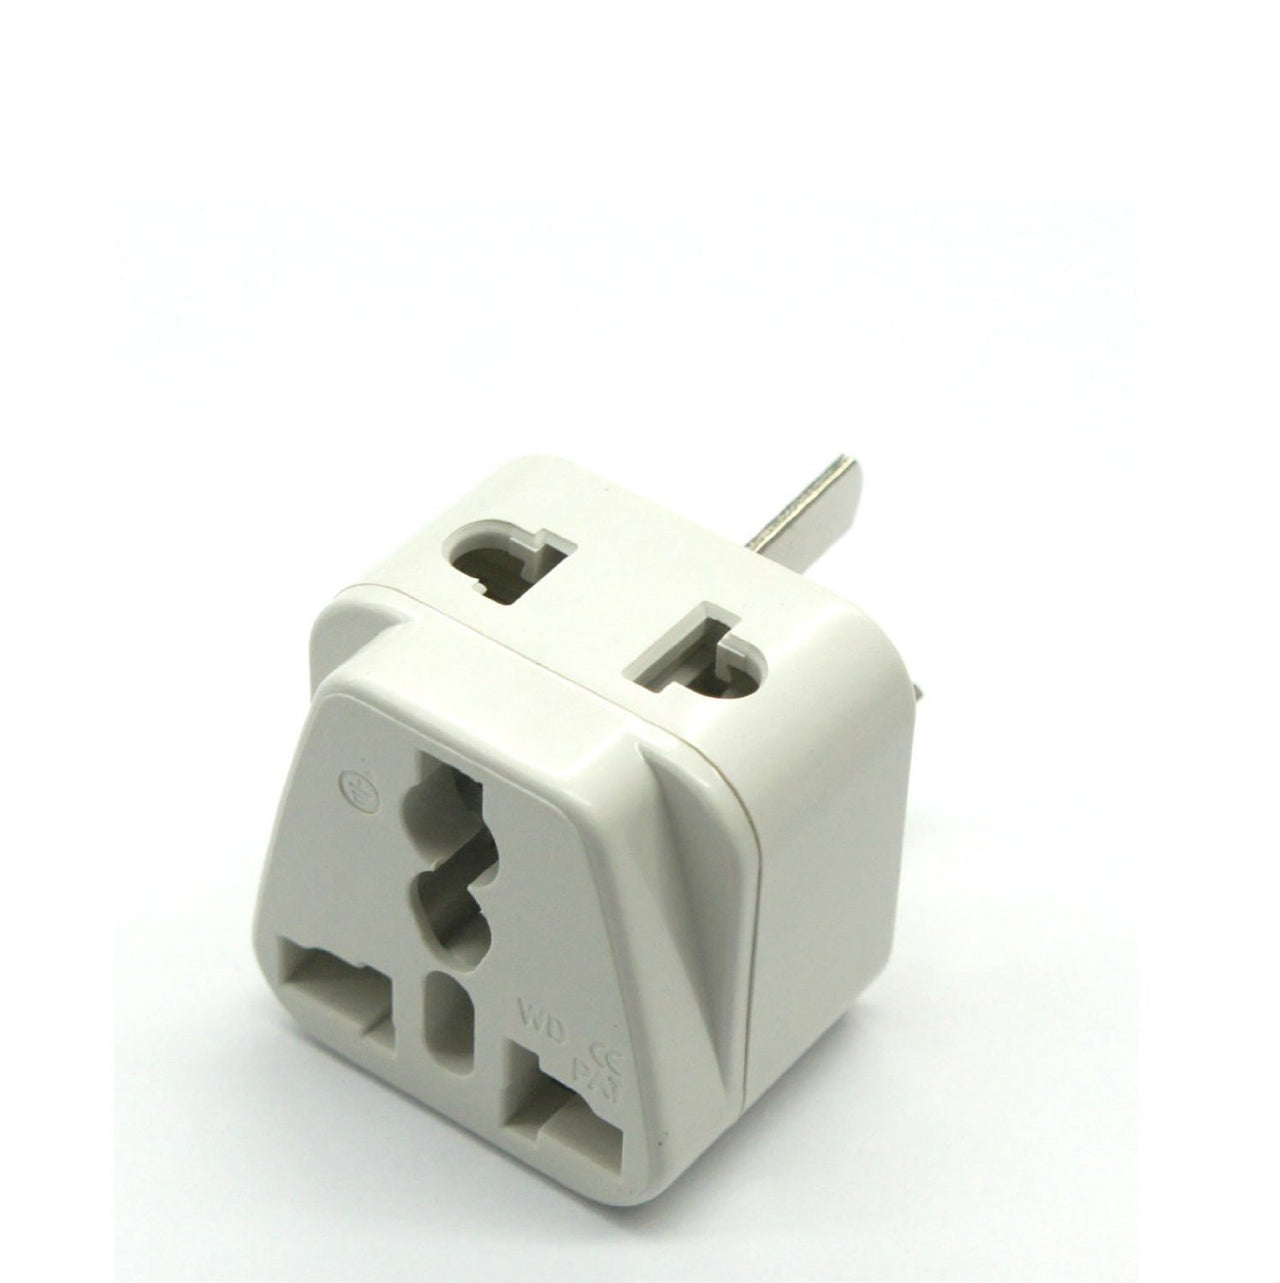 Tmvel Germany, France, Europe, Russia - Type E/F (Schuko) 2 in 1 - Travel Plug Adapter - Popularelectronics.com